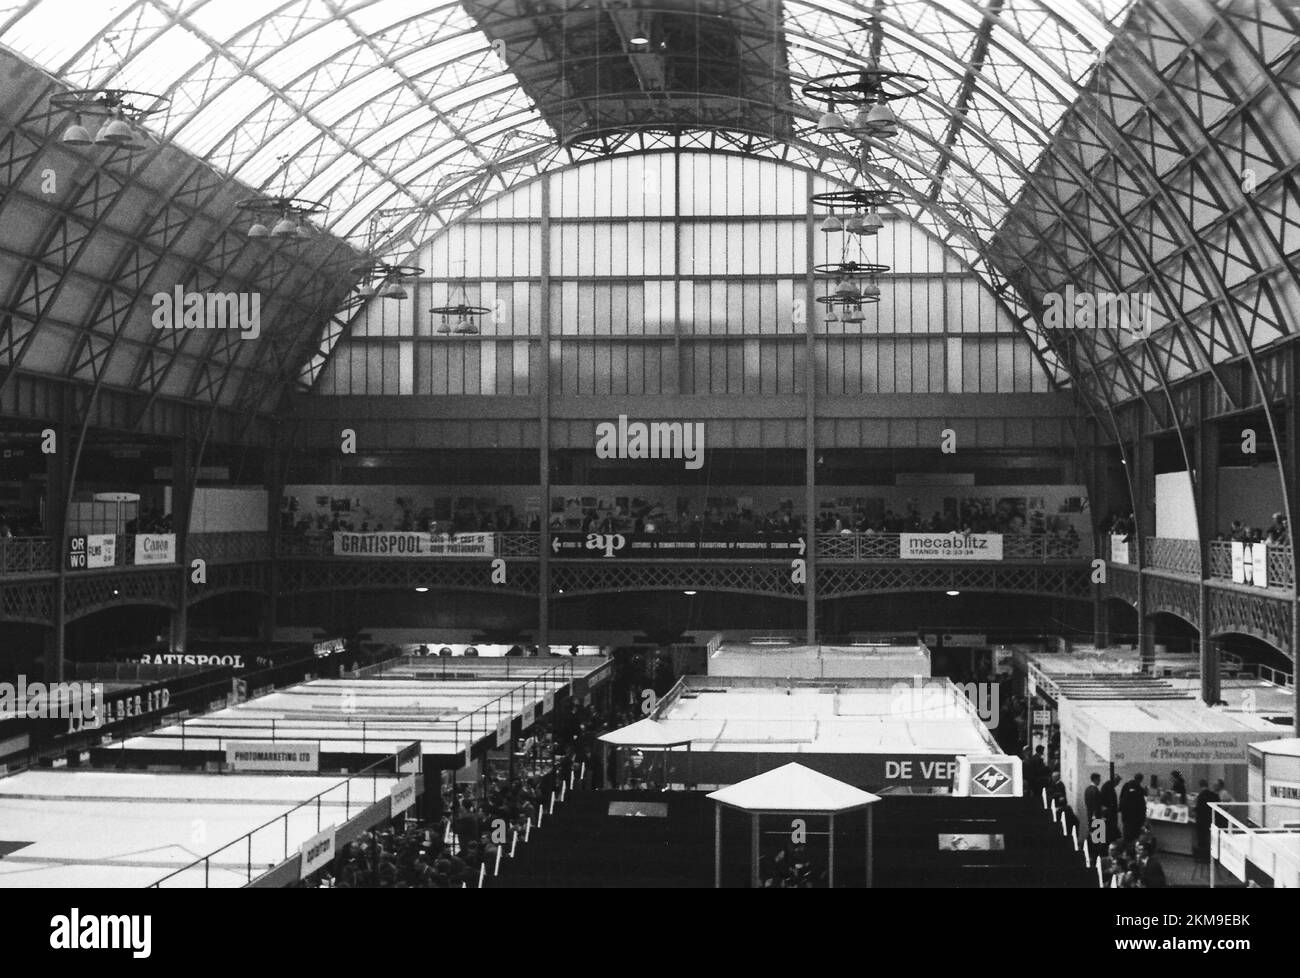 Photography show being held in Olympia London, Olympia Exhibition Centre. Early 1960s - EXACT DATE UNKNOWN. Possibly Amateur Photographer Photo Fair Stock Photo